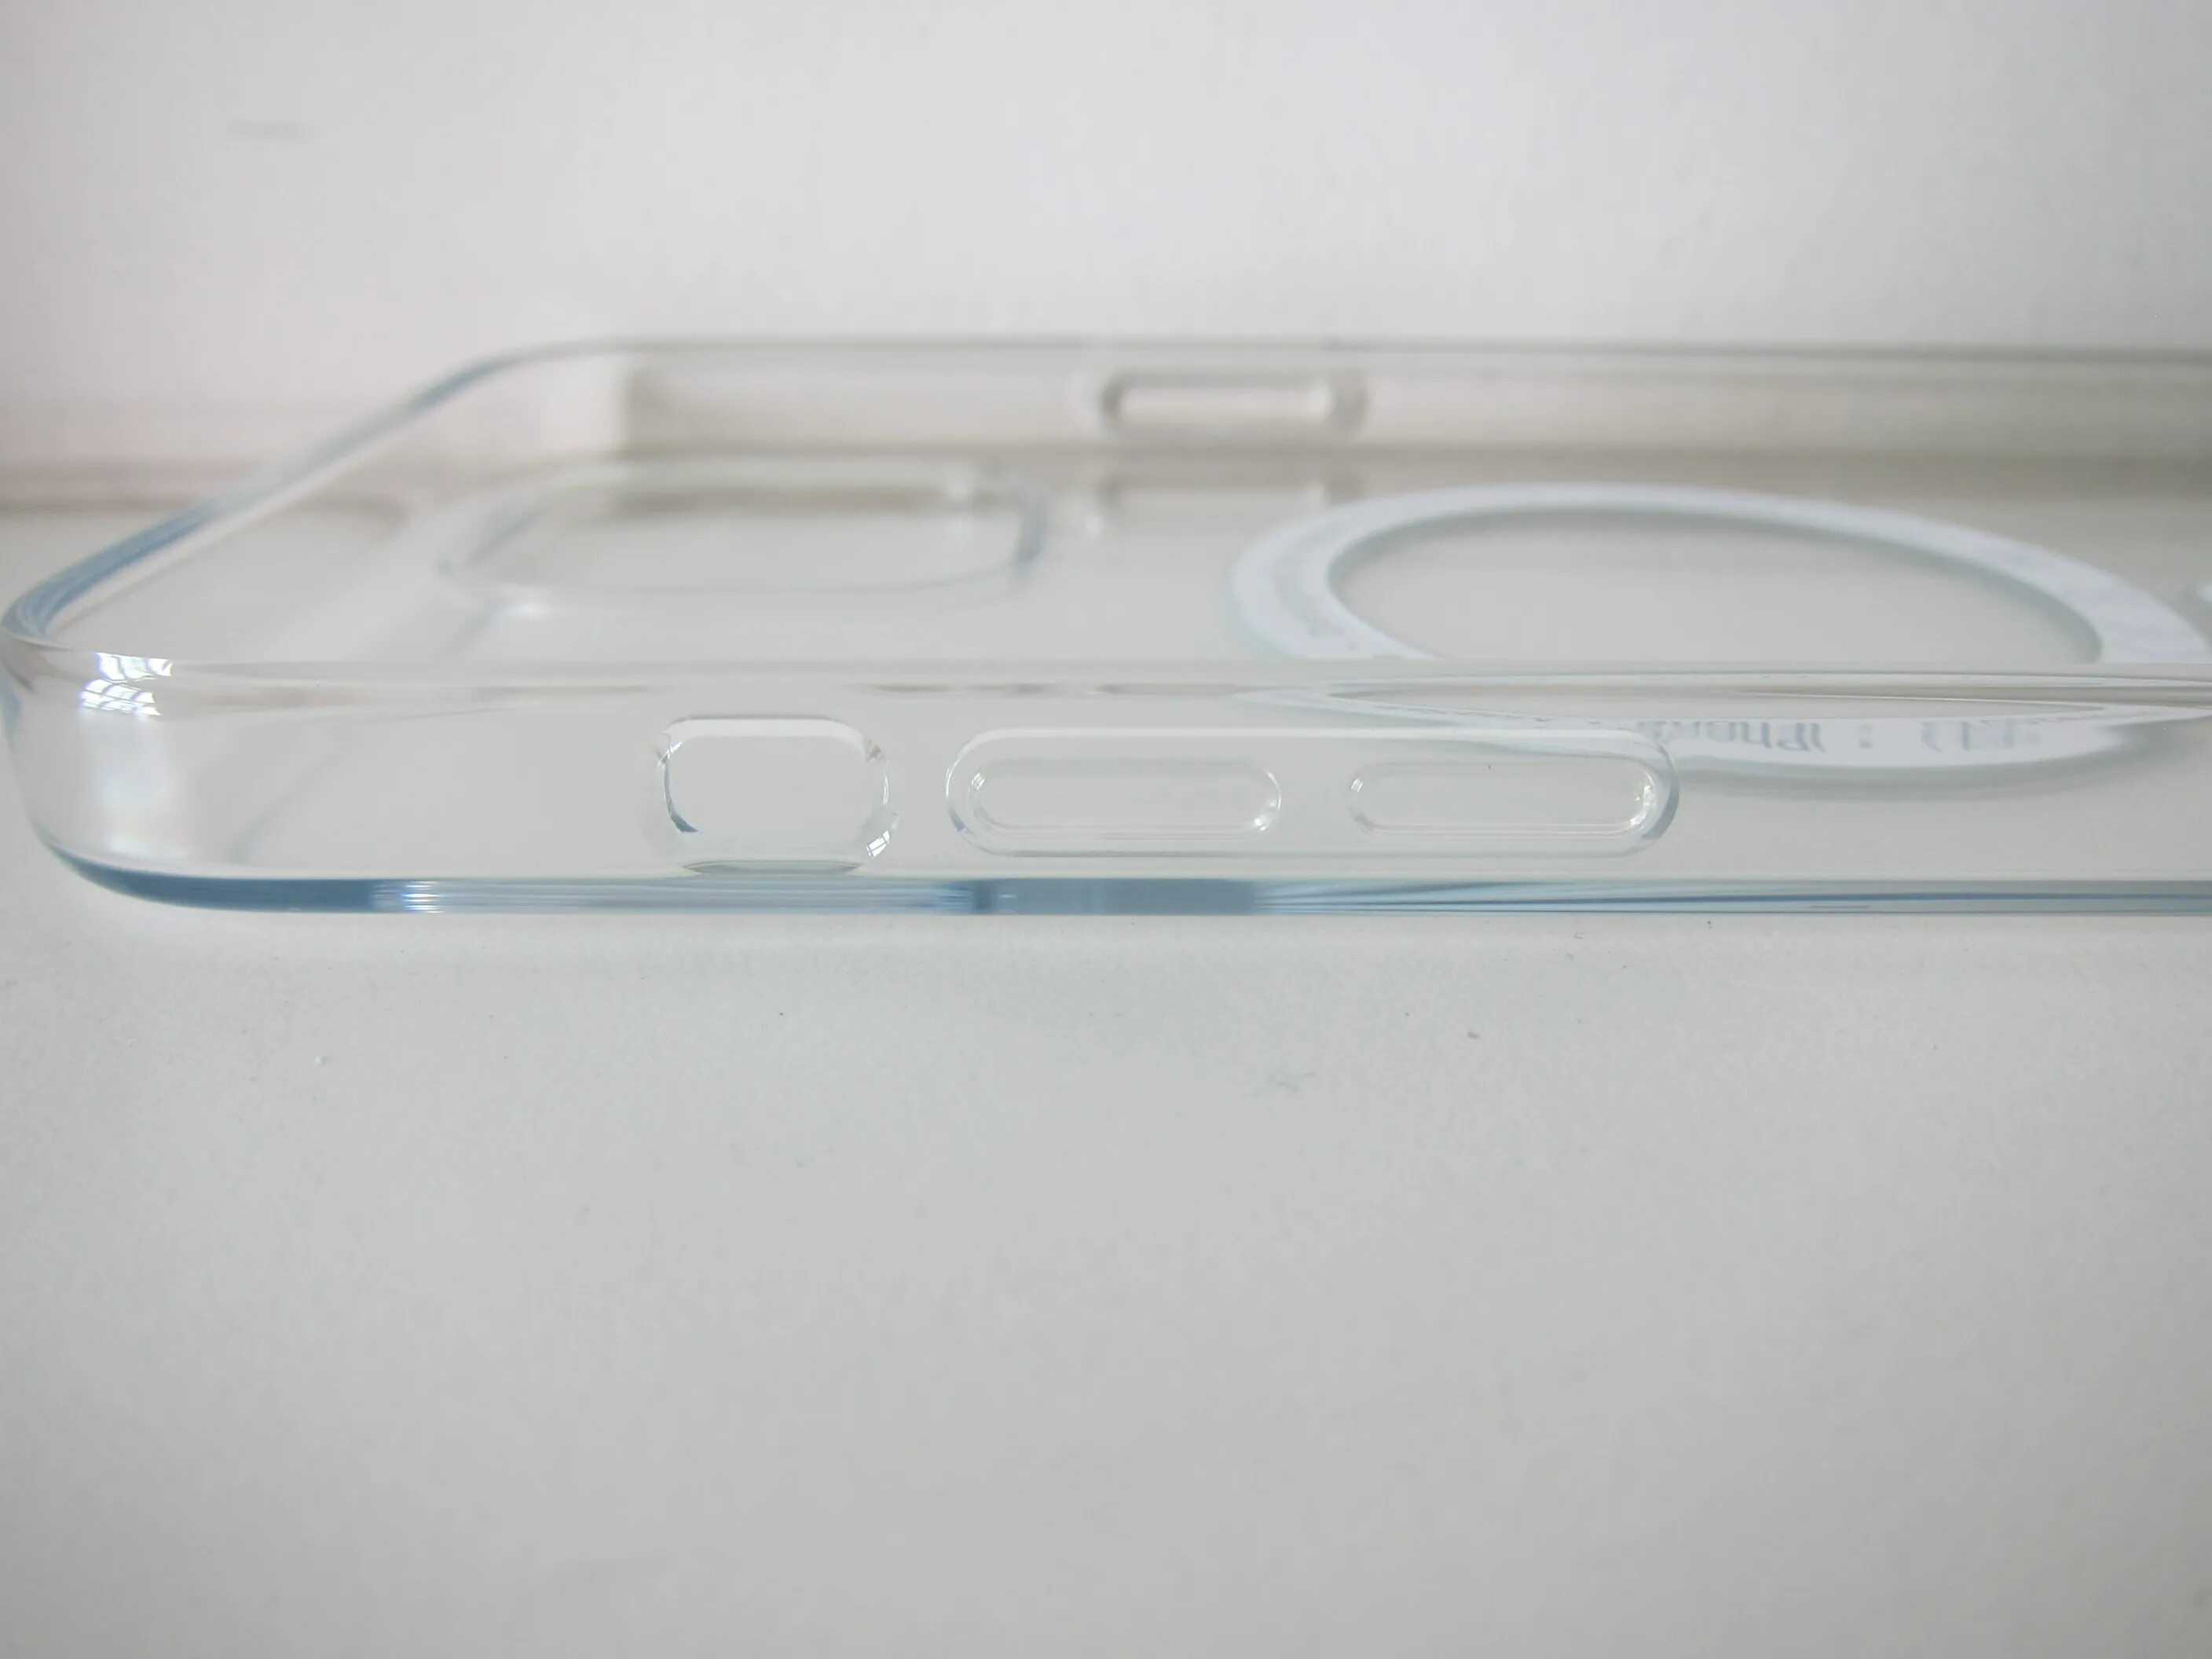 Apple case 15 pro max. Apple Clear Case MAGSAFE для iphone 13. Iphone 12 Pro Max Case. Clear Case iphone 12 Pro Max. Iphone 12 Pro MAGSAFE Case.